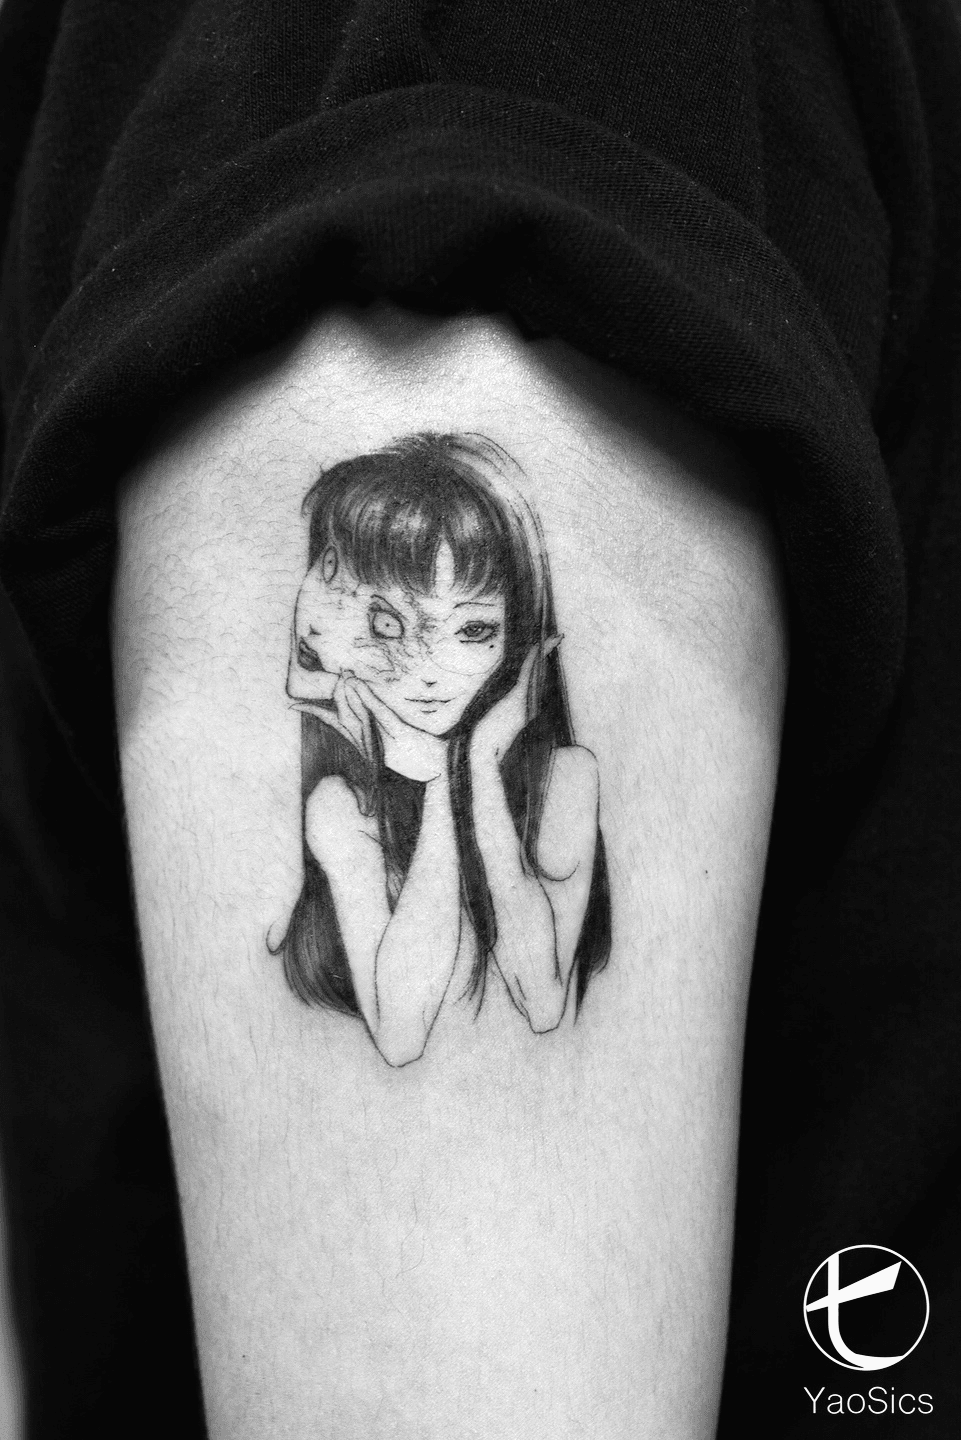 Olivier Rose  Tomie from the manga junji ito  Thankyou Riza for  trusting me with this one This was so much fun to tattoo  if you have  any commission ideas